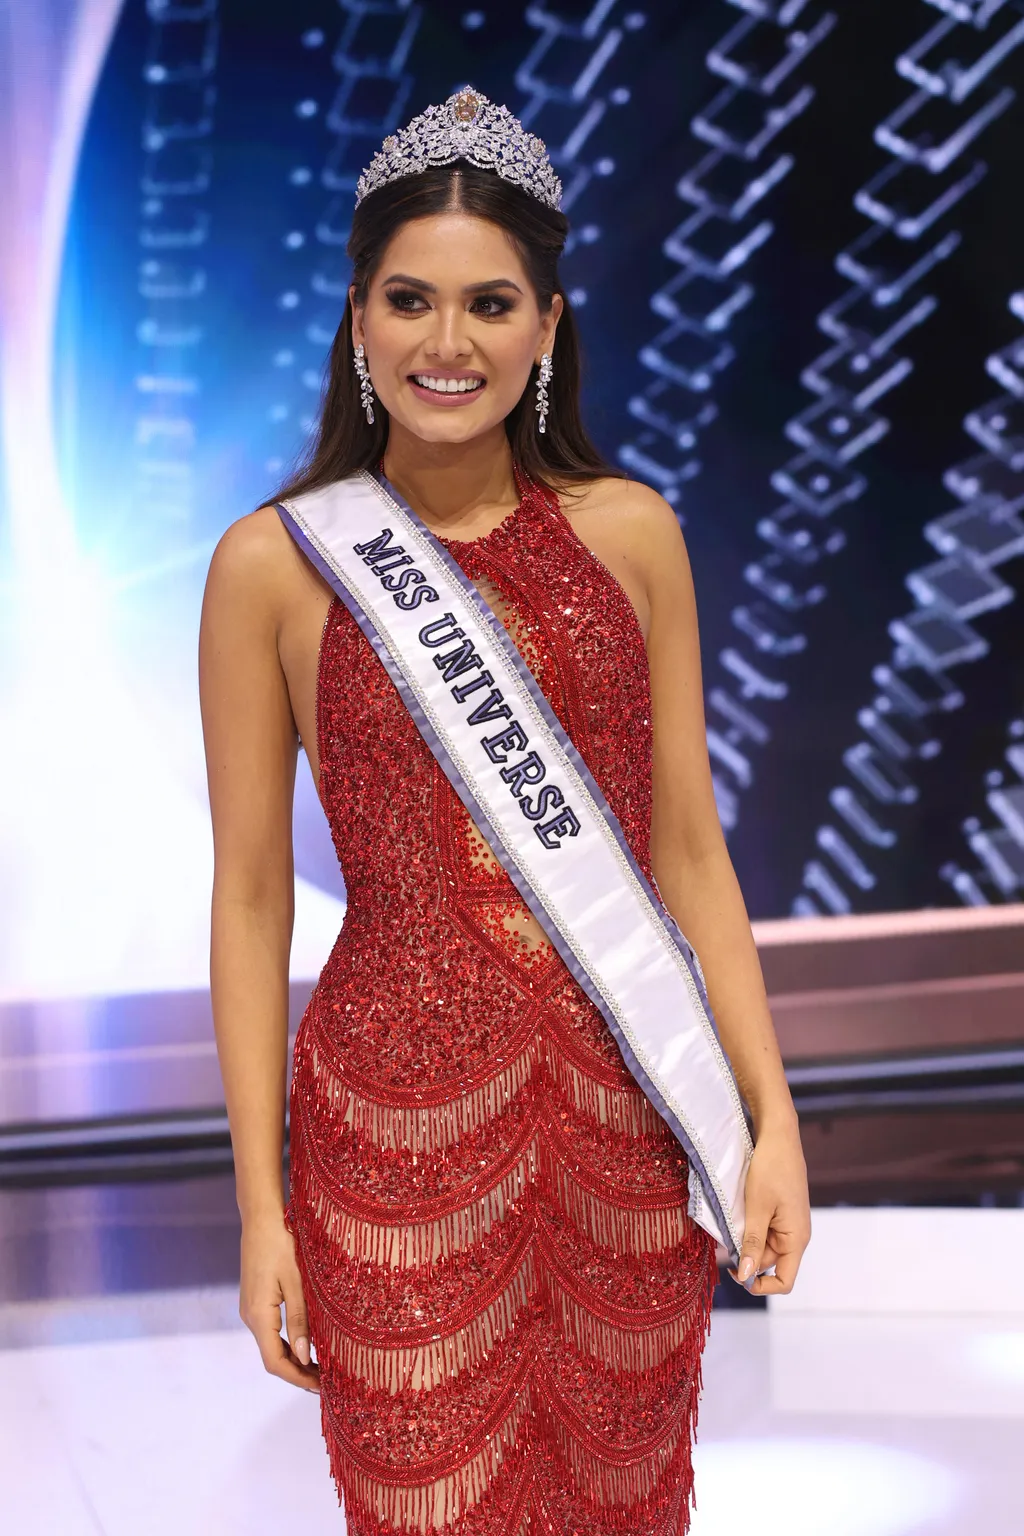 Miss Universe 2021 GettyImageRank3 arts culture and entertainment Vertical 